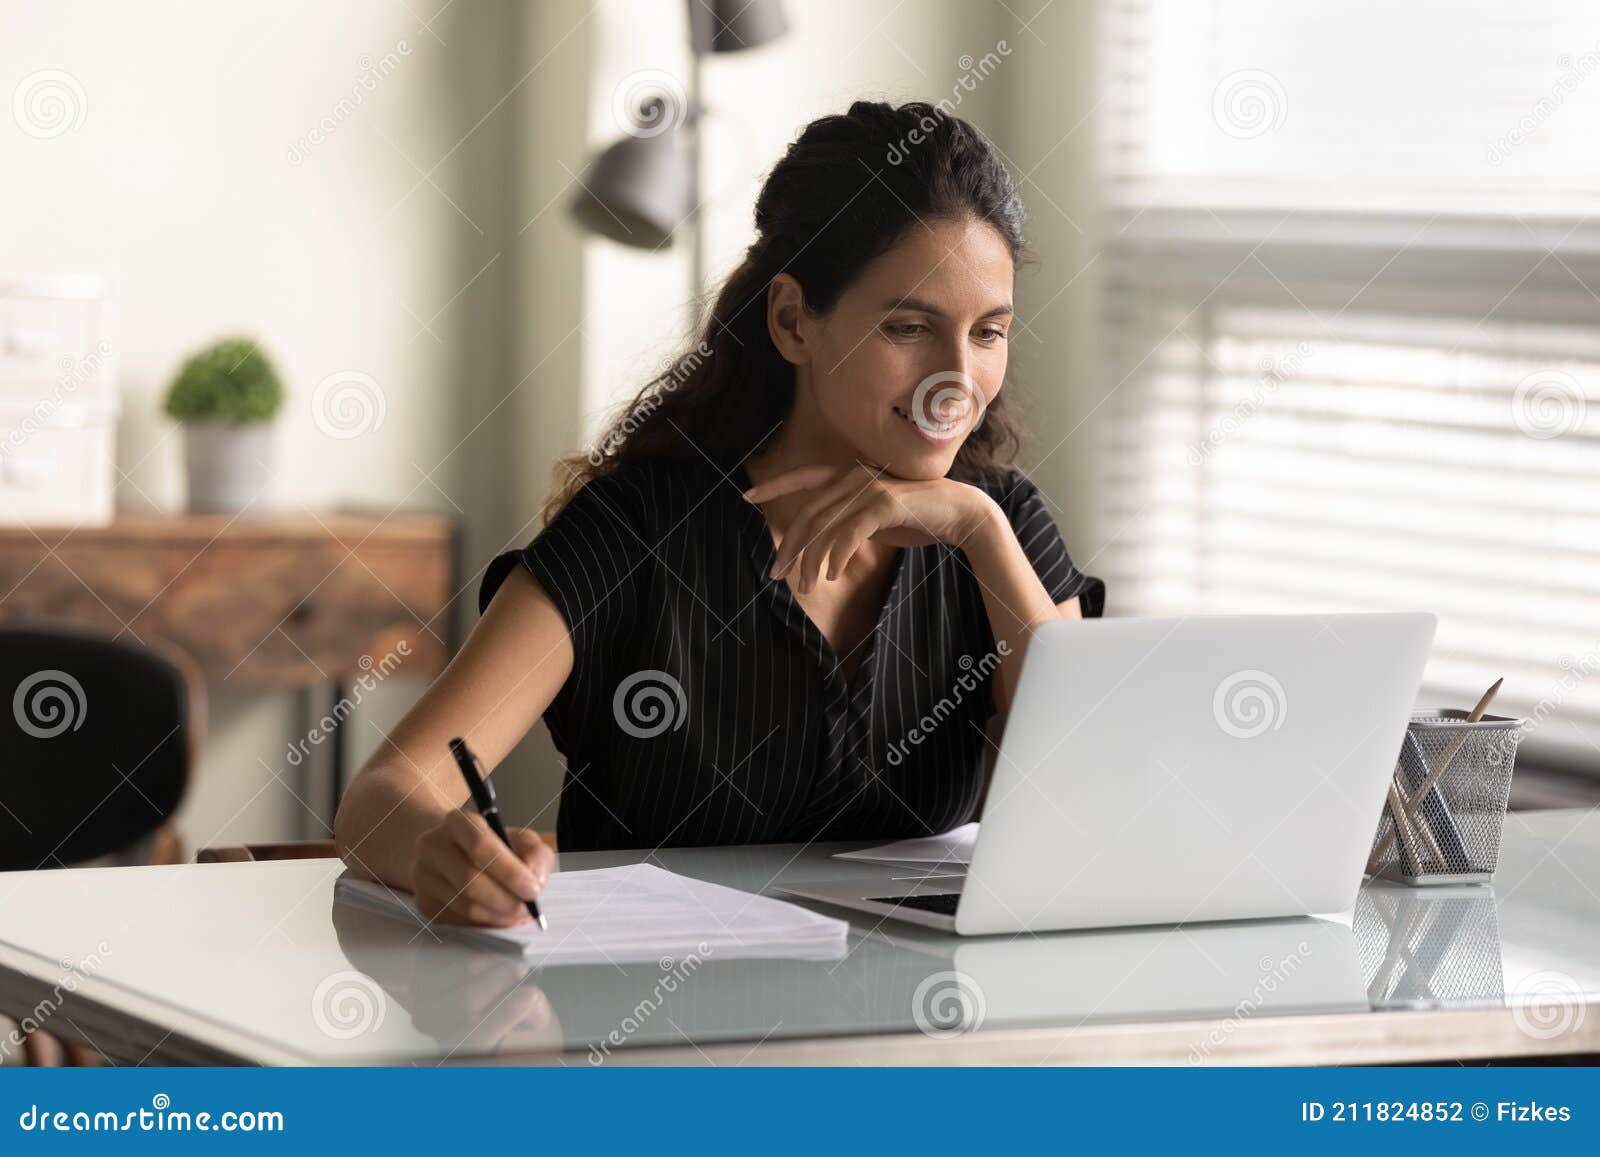 smiling woman looking at laptop screen, taking notes, studying online